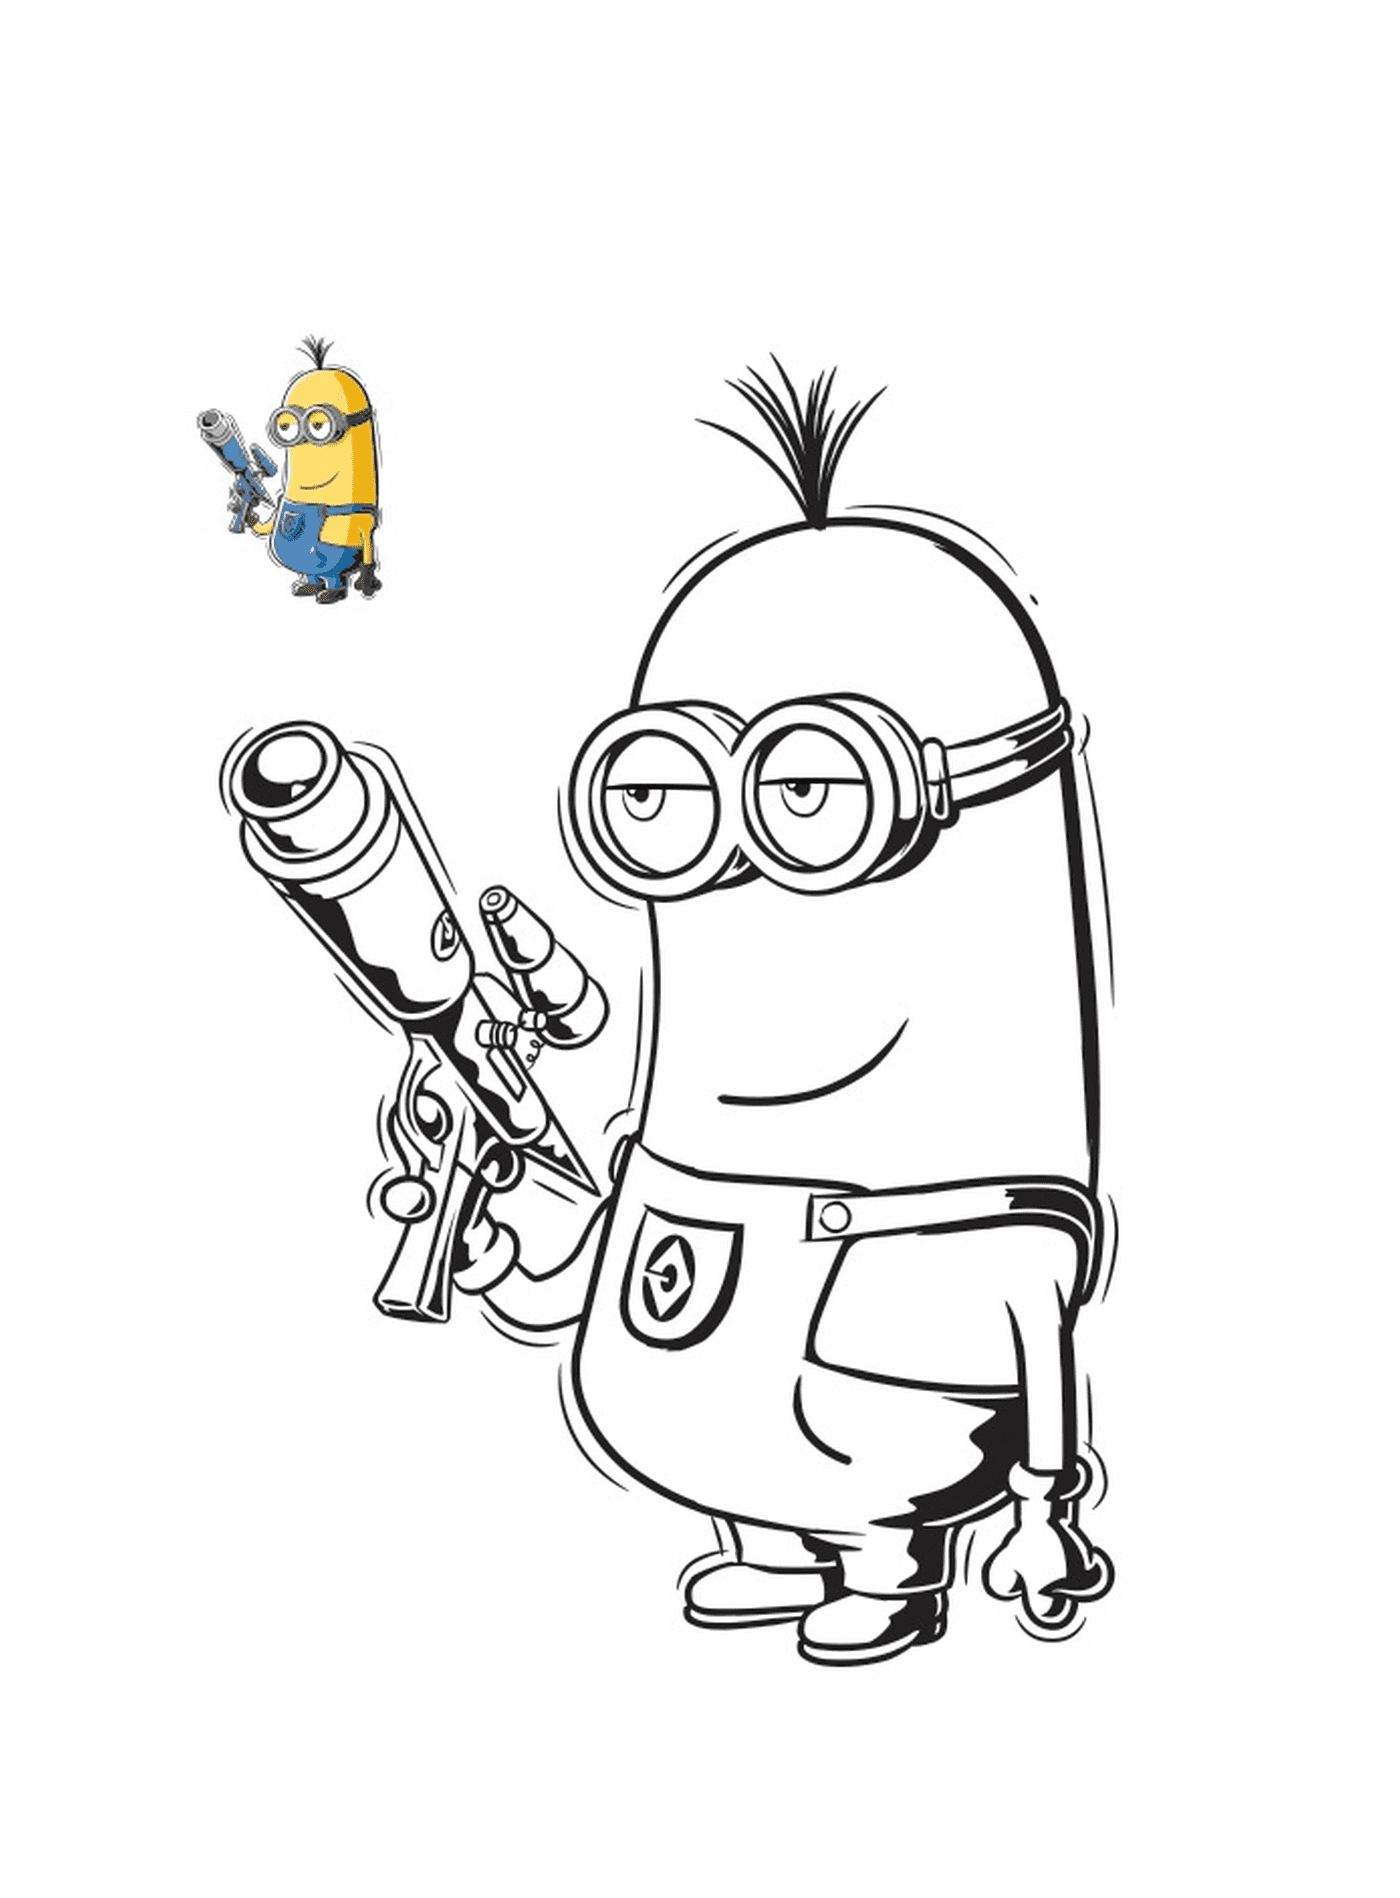  Minion armed, rifle in hand 